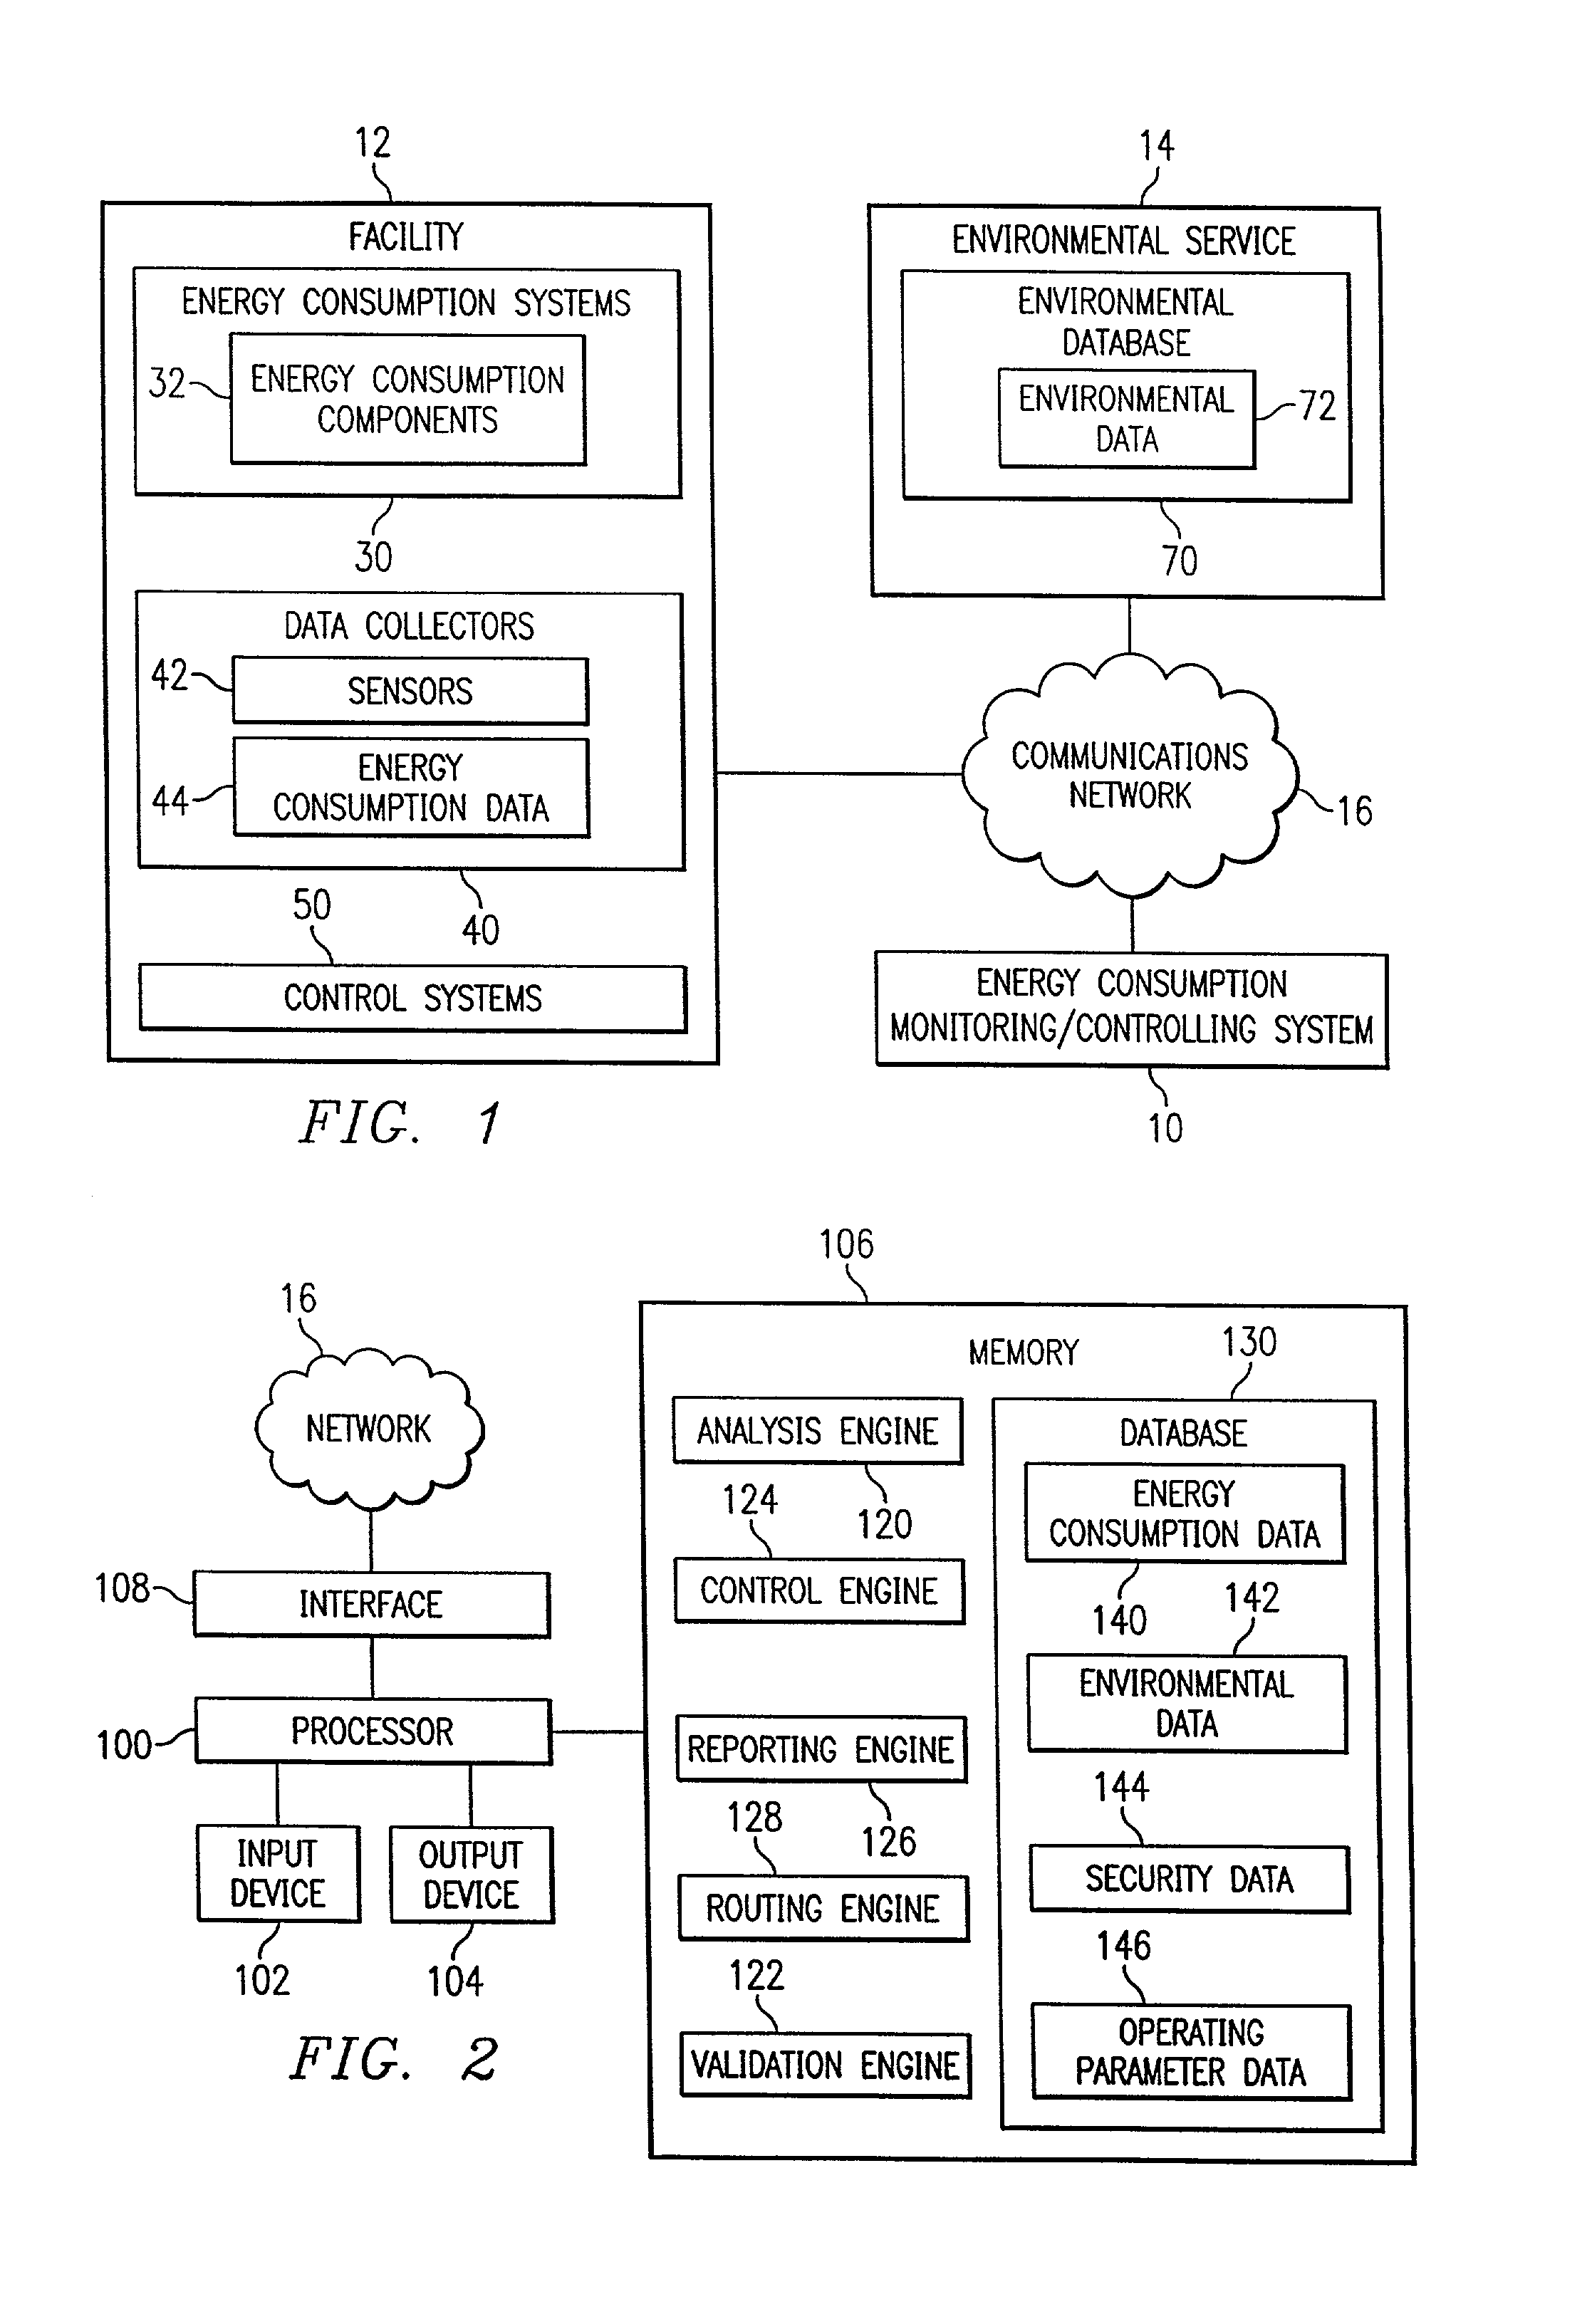 System and method for remote monitoring and controlling of facility energy consumption